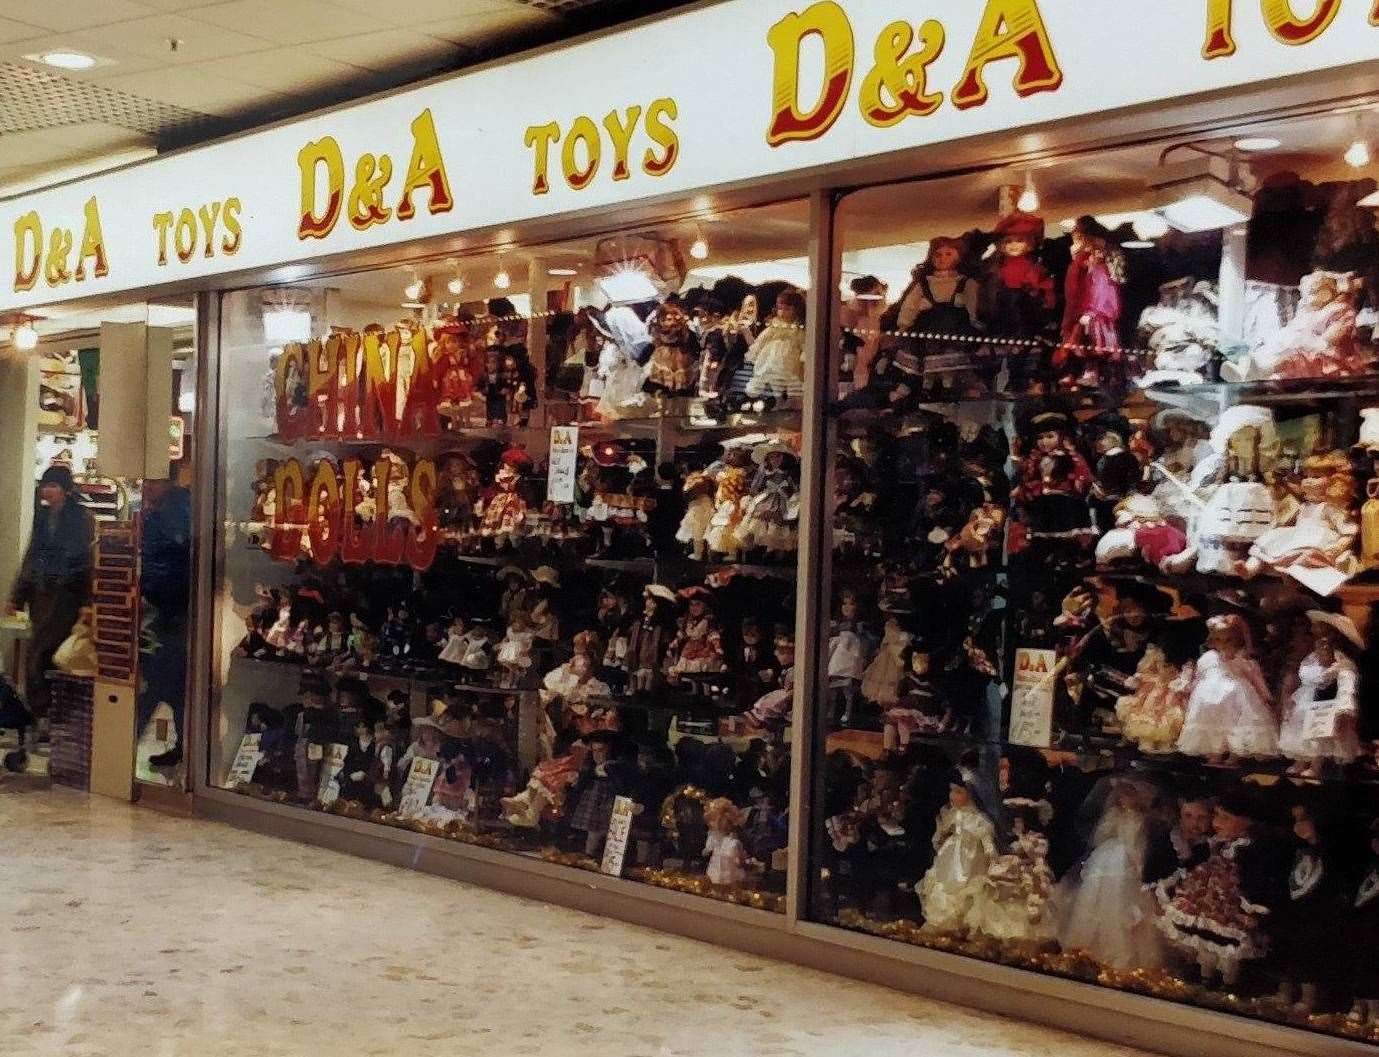 The shop has seen many toy trends come and go - including china dolls